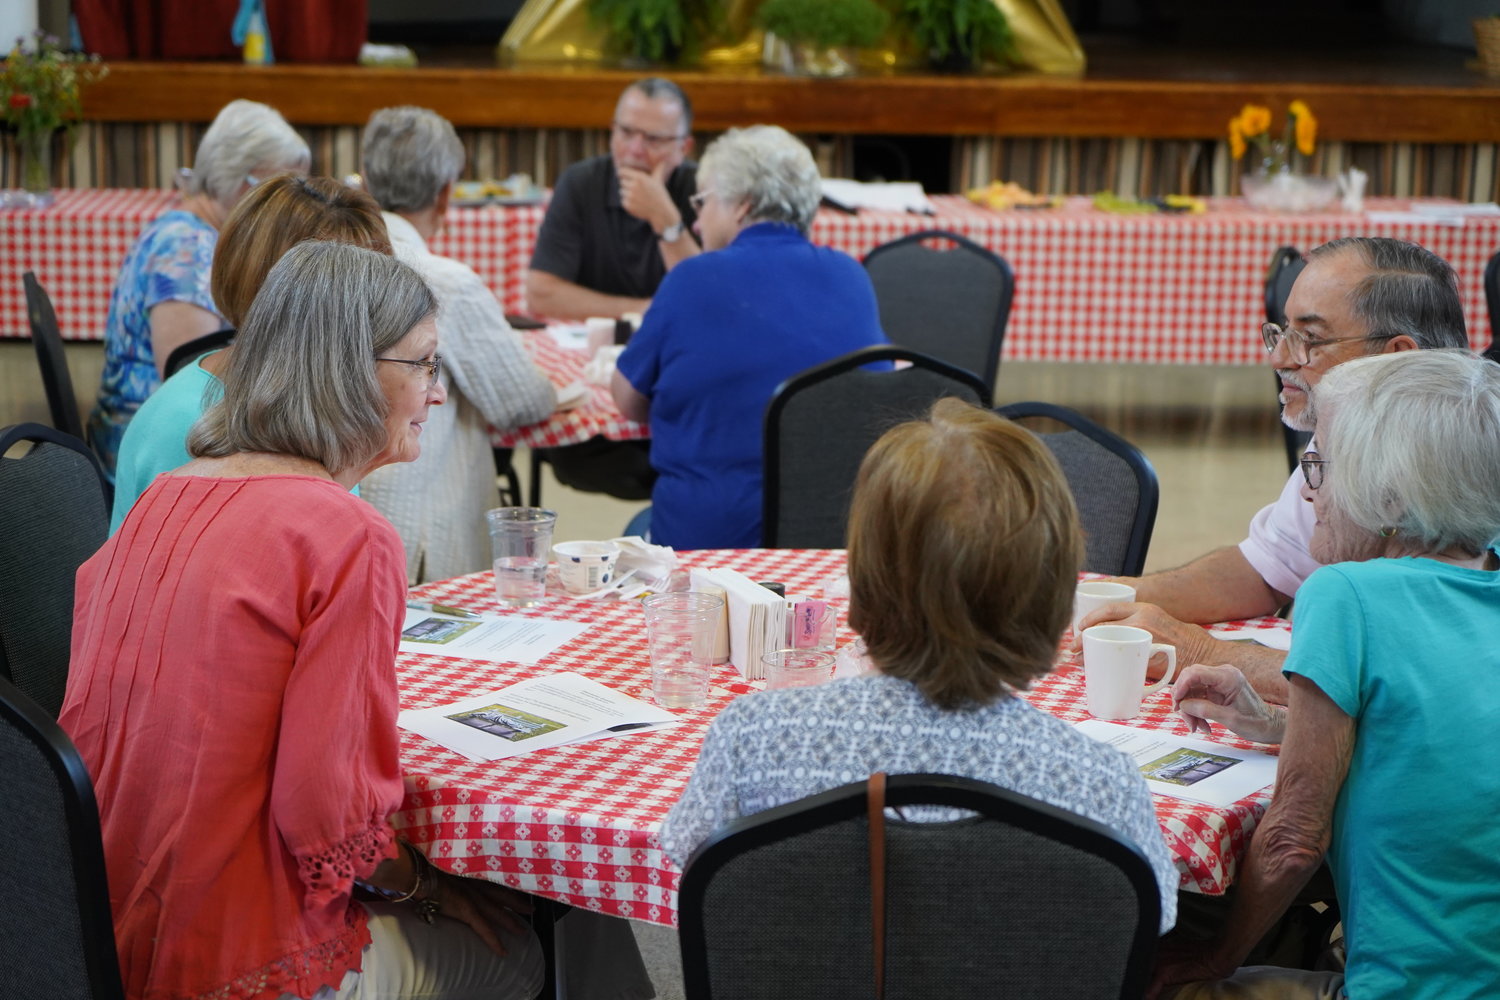 People take part in a "Eat and Learn" discussion about homelessness, in the Sacred Heart Parish Activity Building in Columbia.